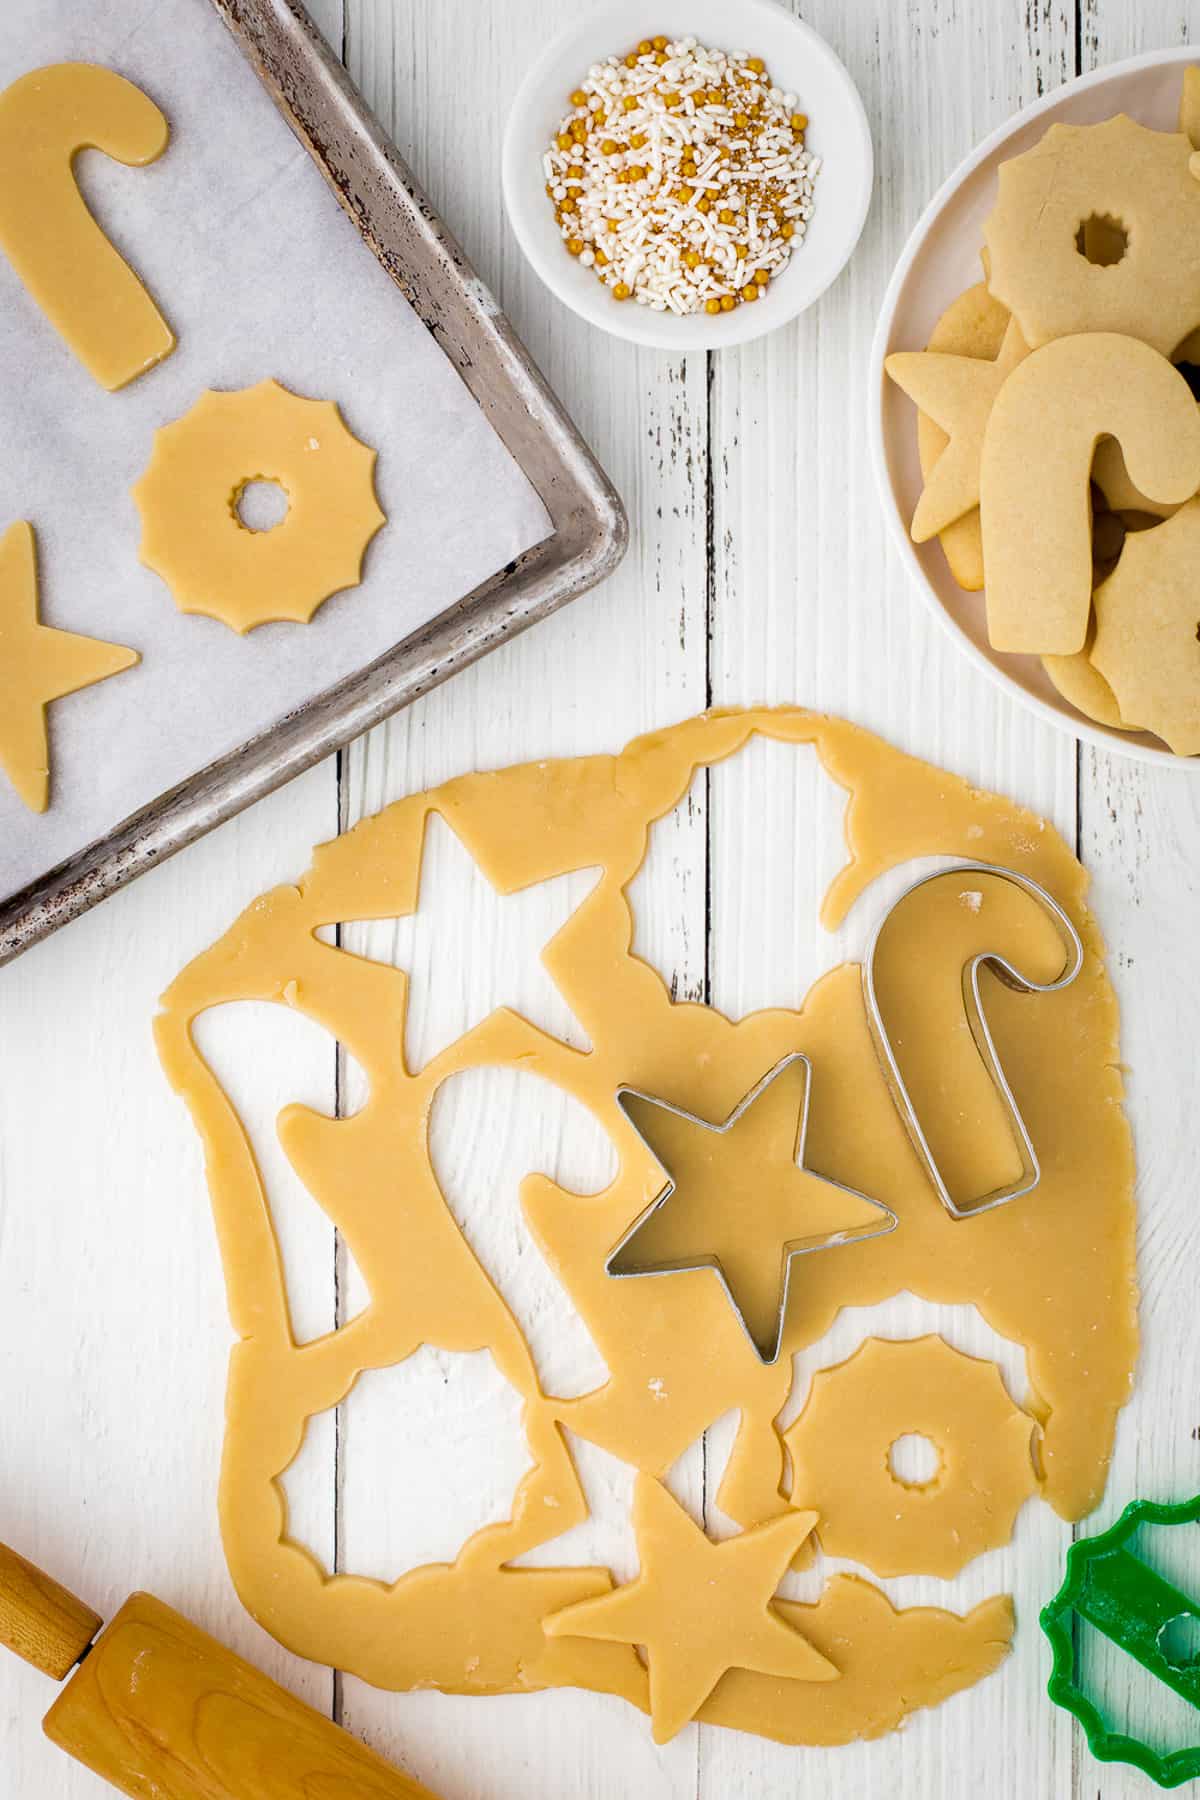 Cutting cookies from rolled-out dough with star and candy cane shapes.